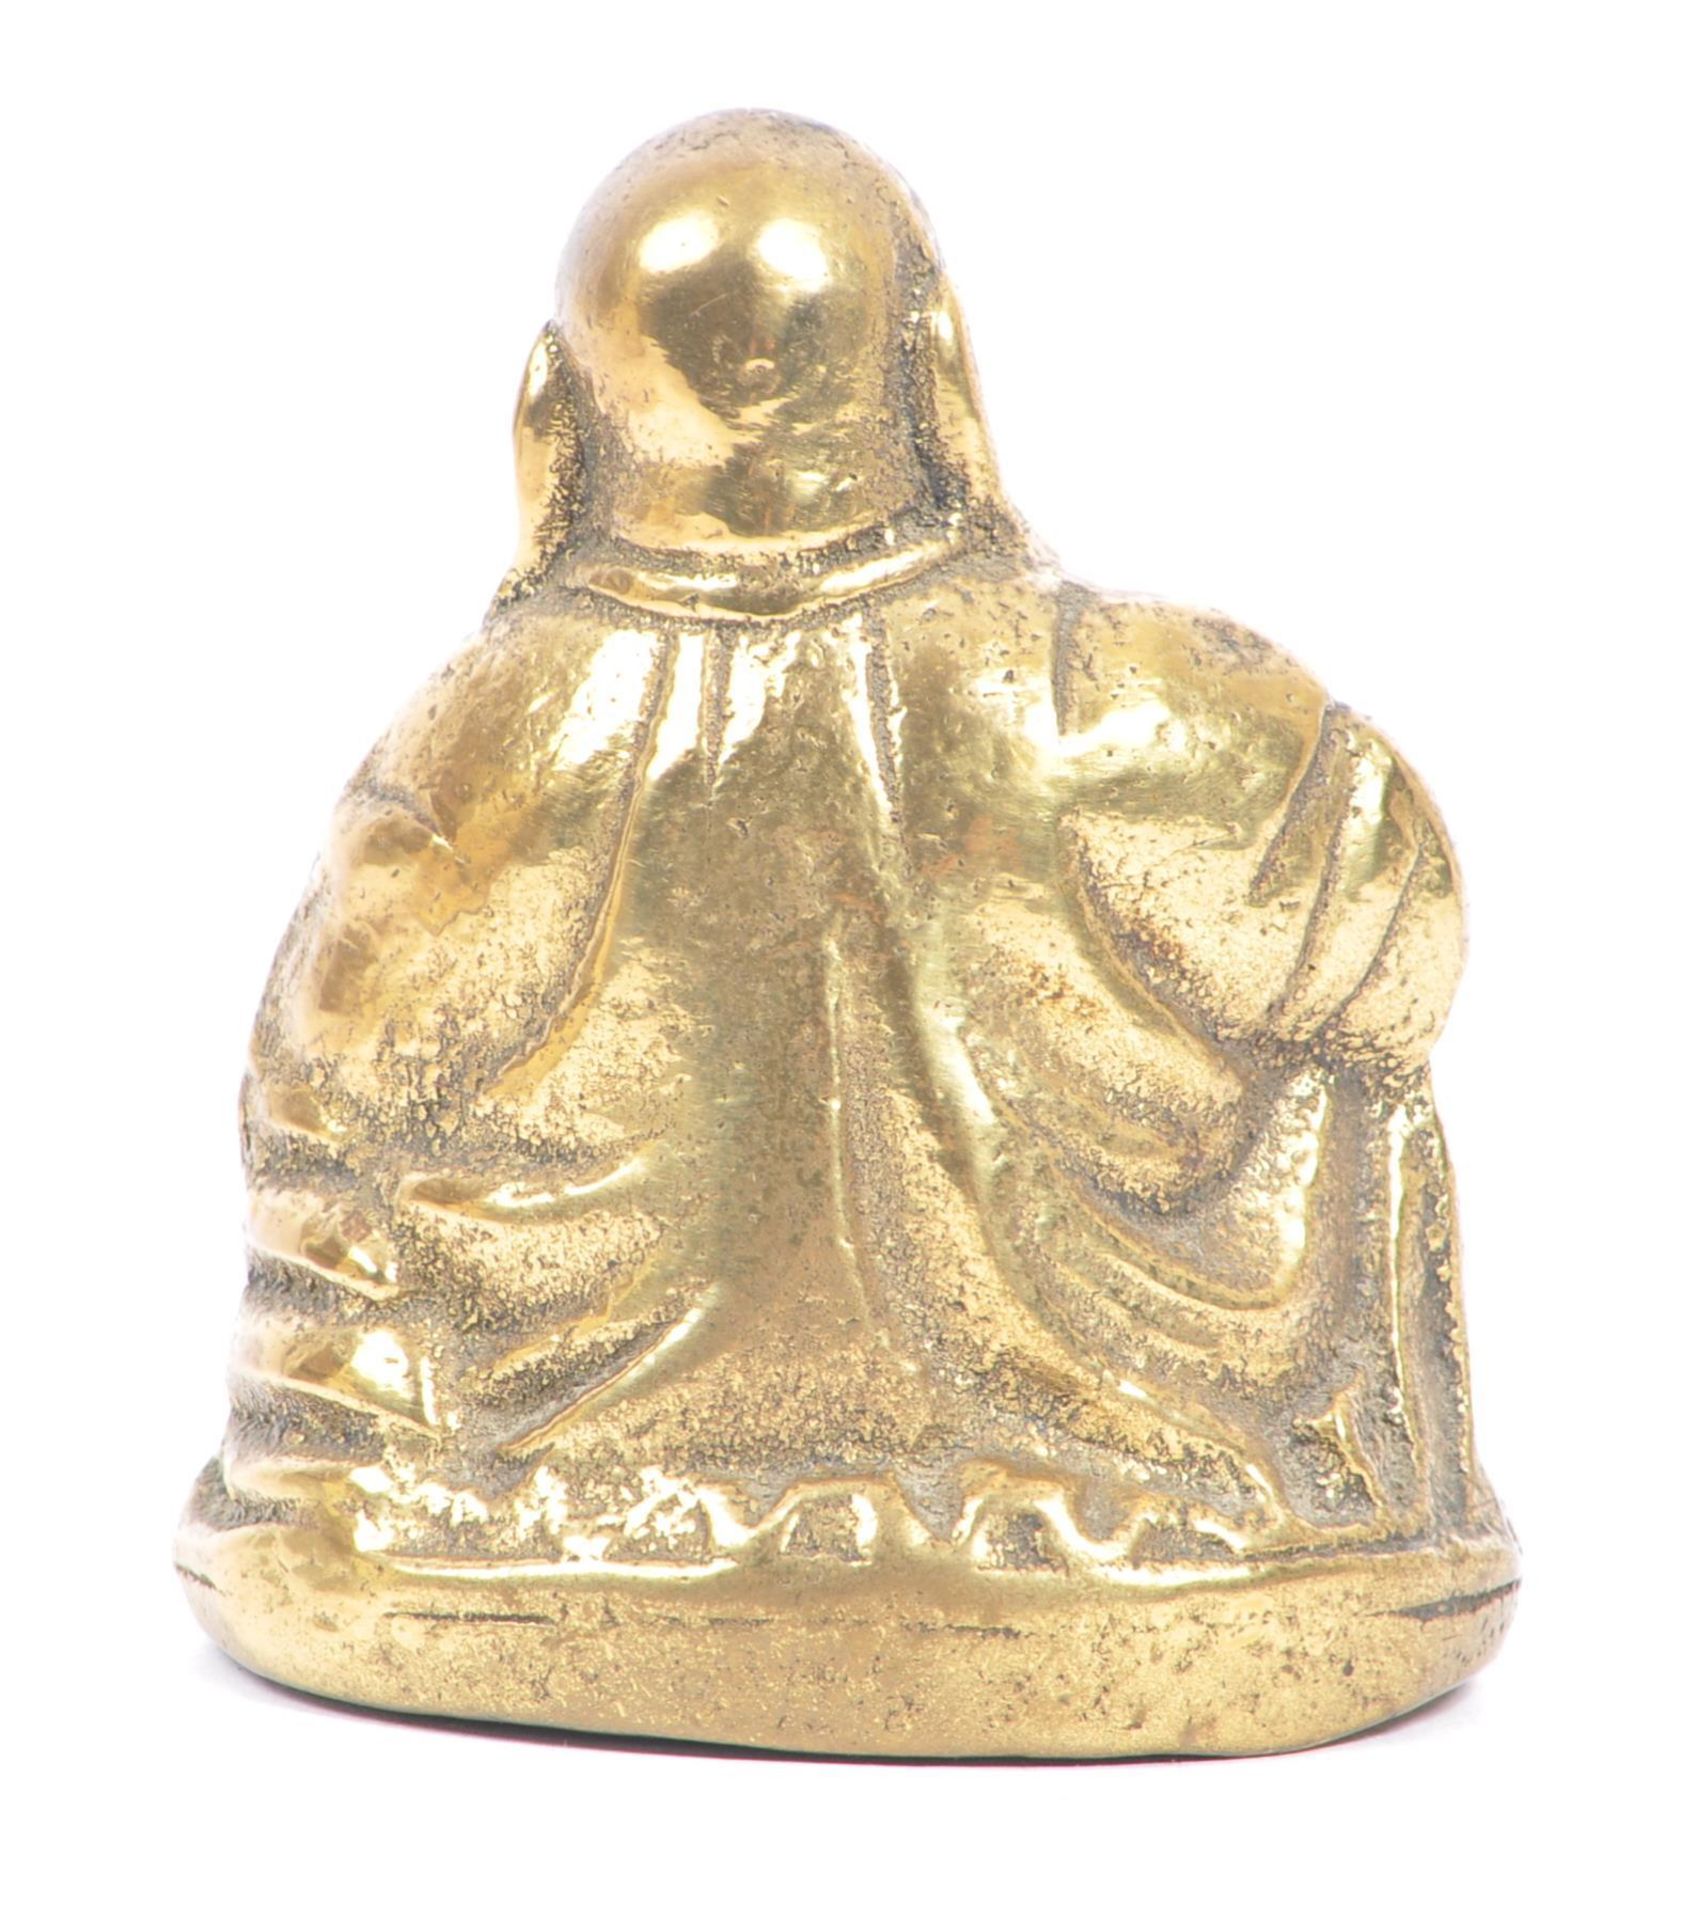 CHINESE EARLY 20TH CENTURY BRASS LAUGHING BUDDHA FIGURE - Image 3 of 6